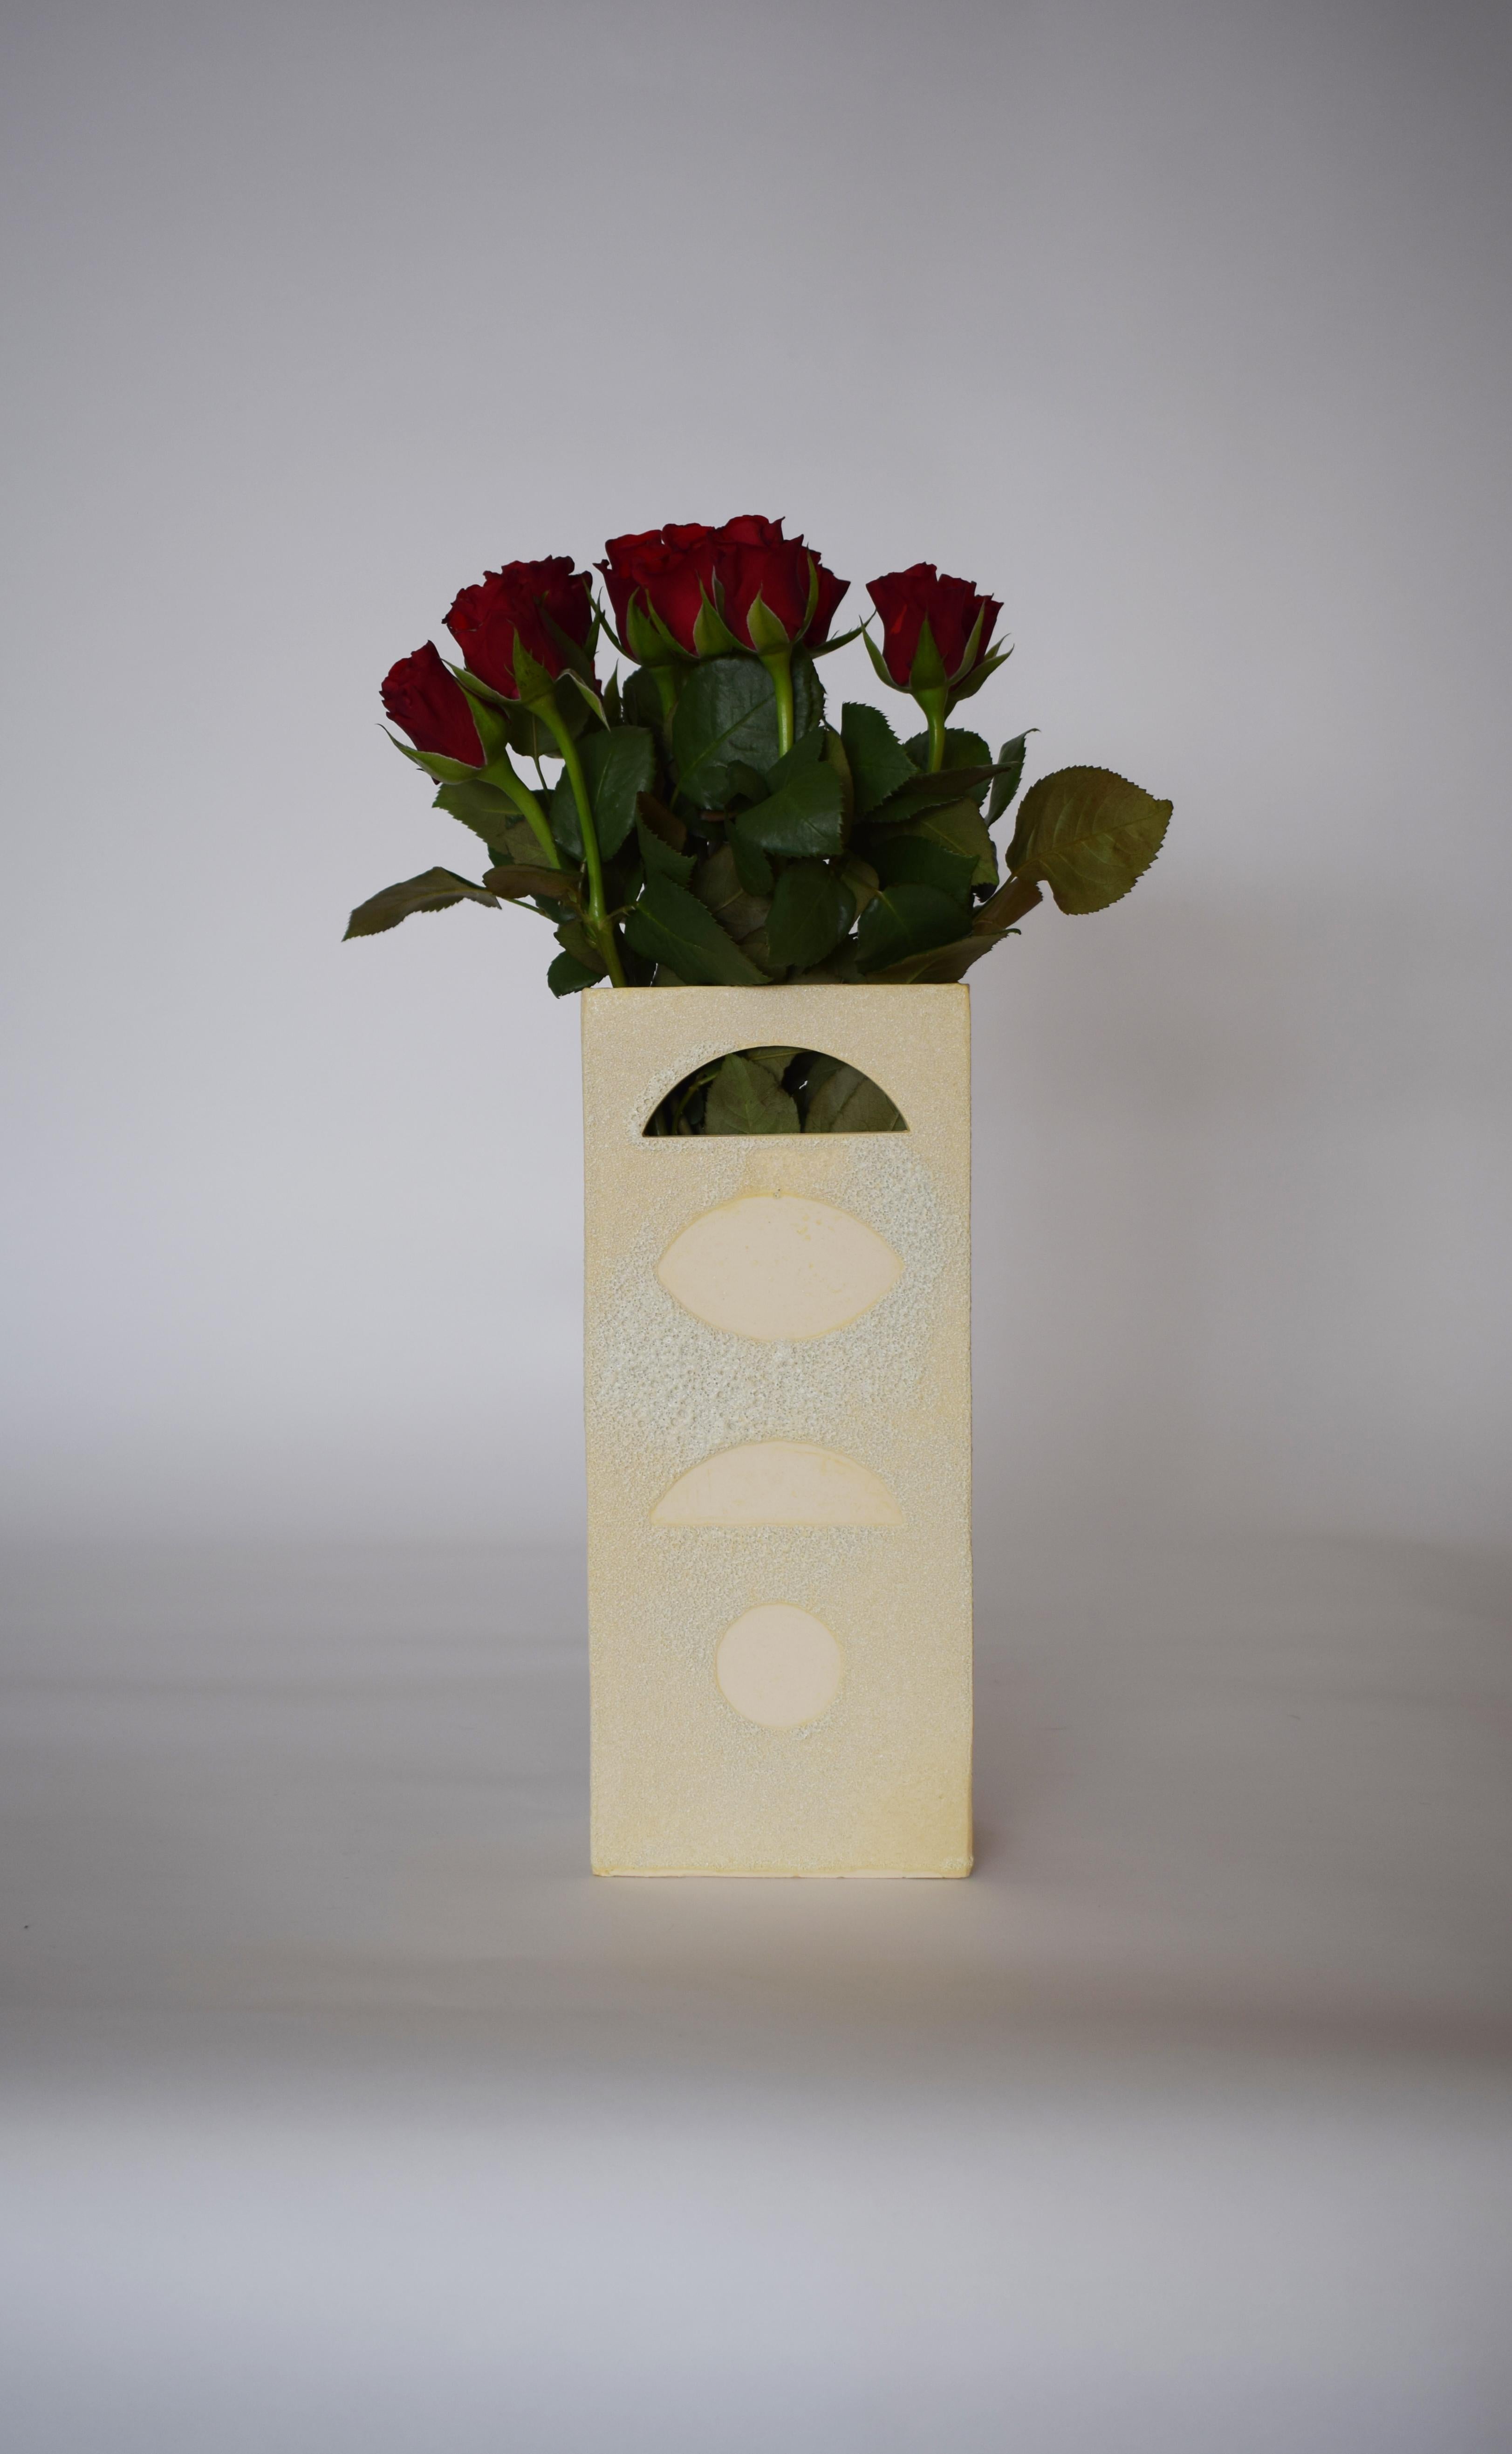 This meticulously crafted glazed ceramic vase is skillfully handcrafted by James Hicks. The design features a sleek modern rectangle hollow brick form with a glazing pattern inspired by the architectural elements of Louis Kahn's iconic buildings for